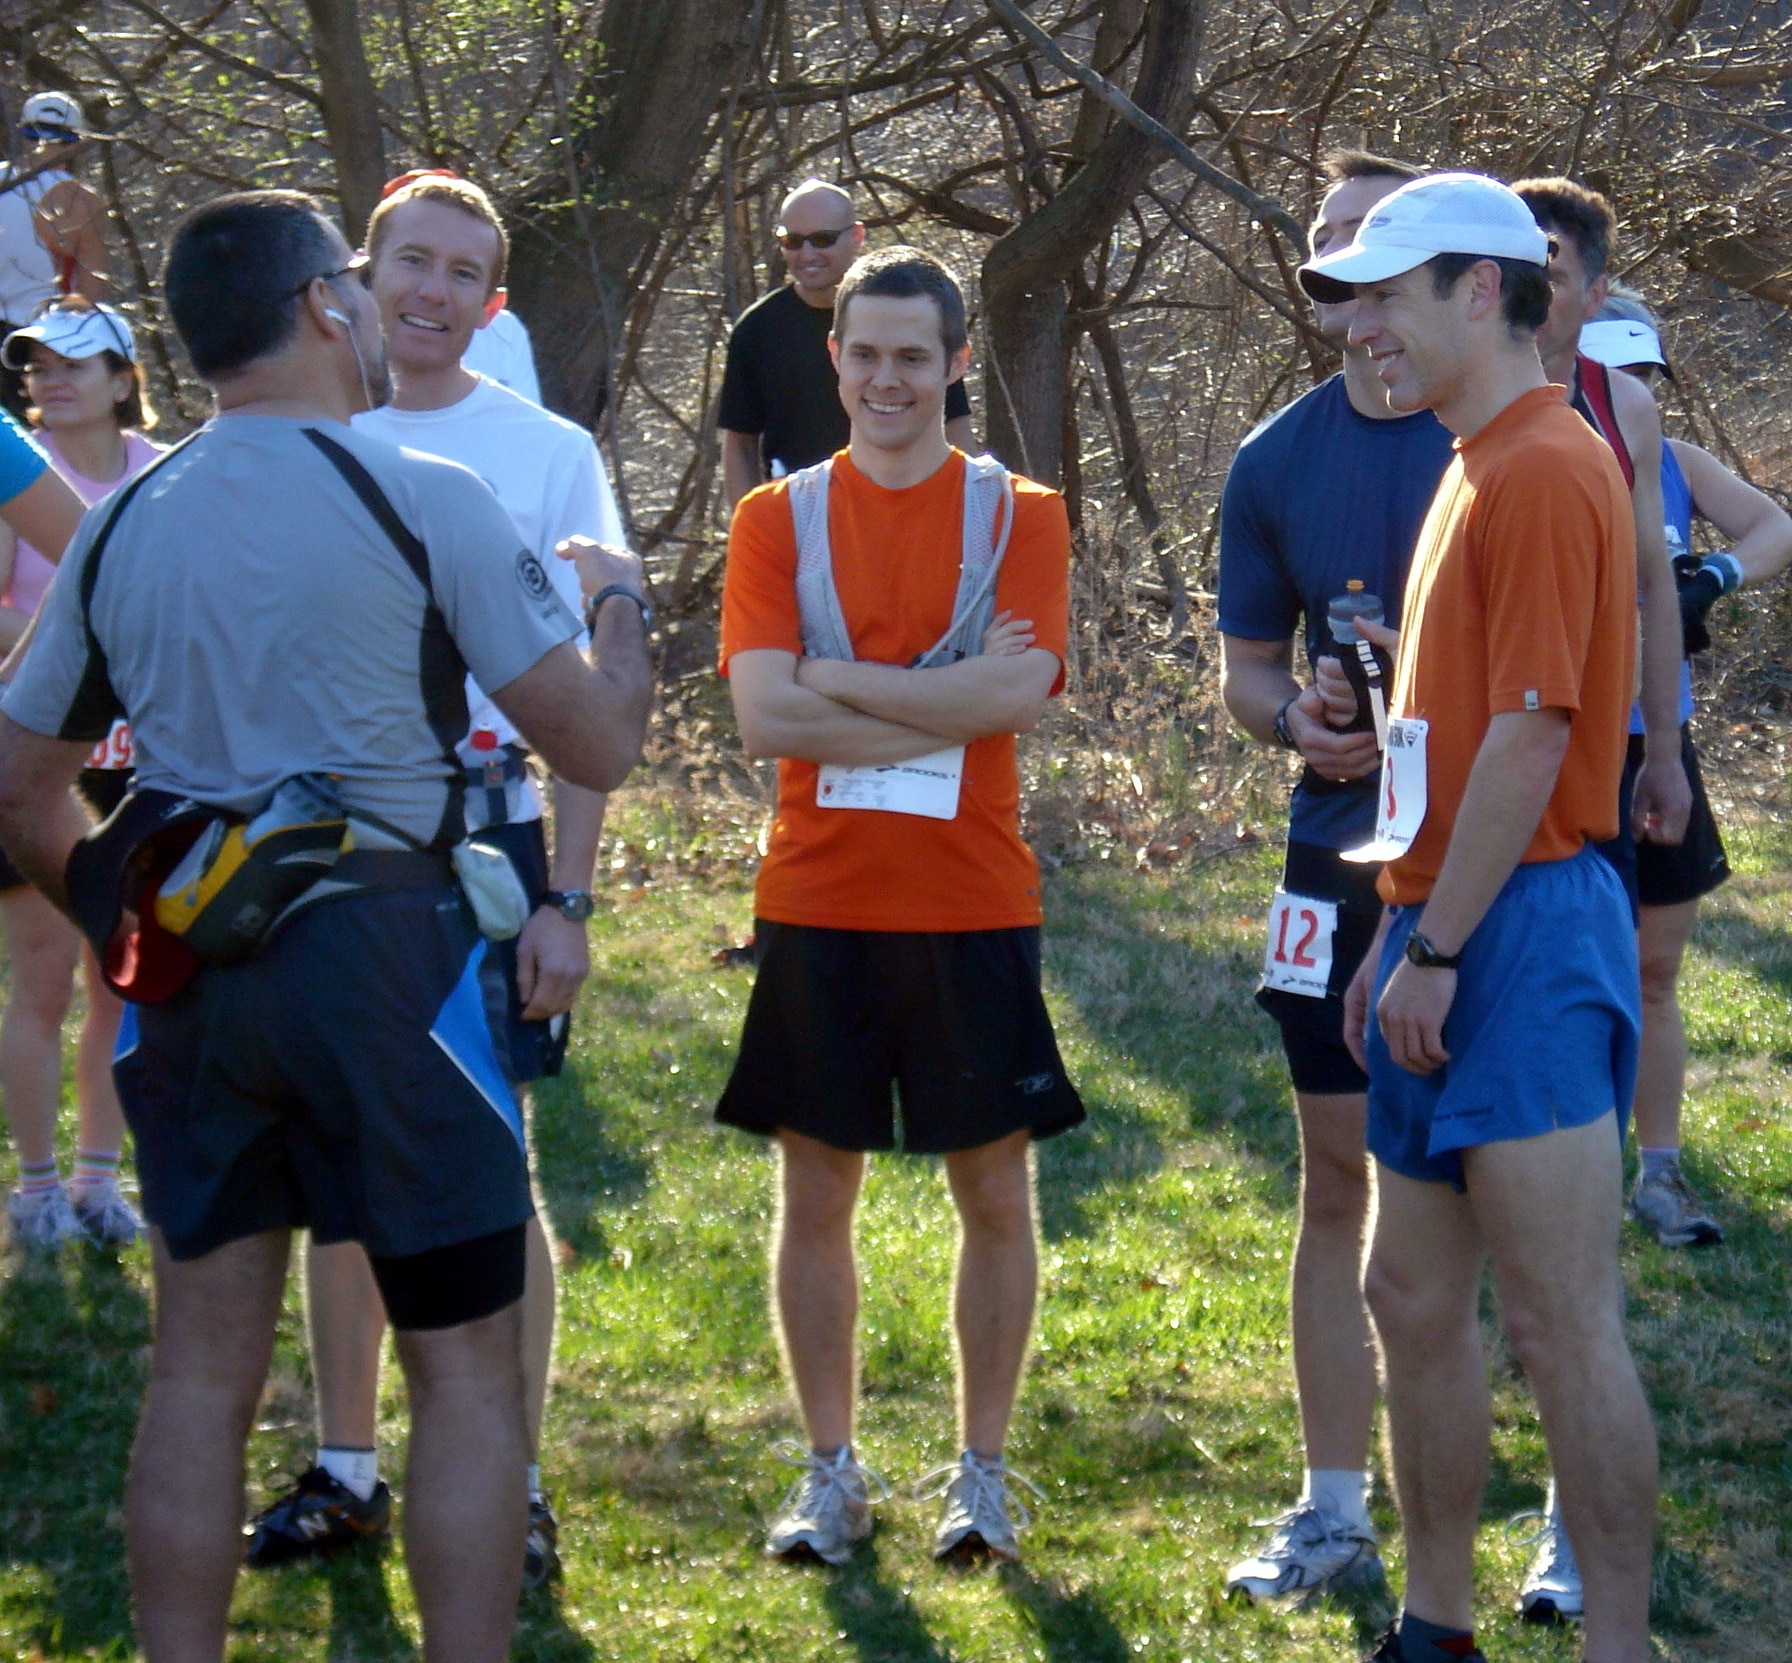 Matt chatting with group of runners at HAT 50K